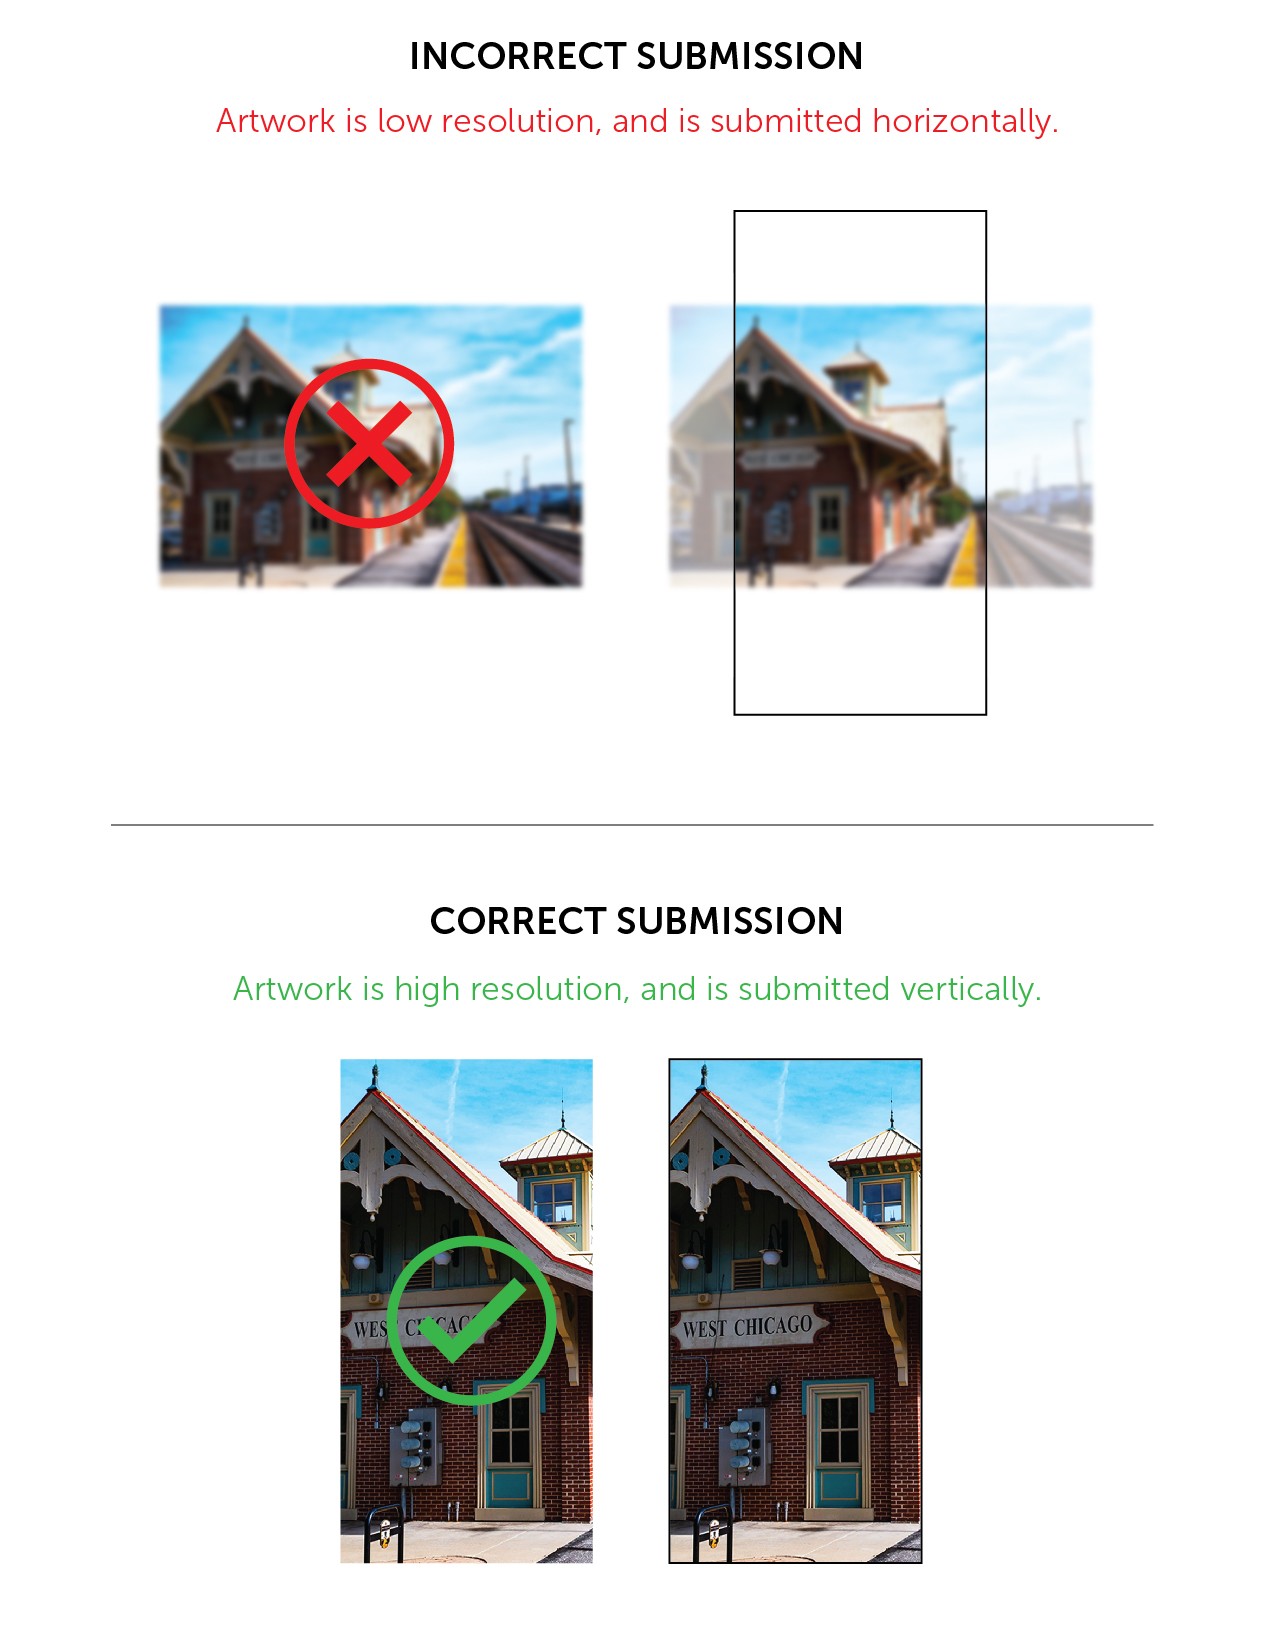 How to Submit Artwork